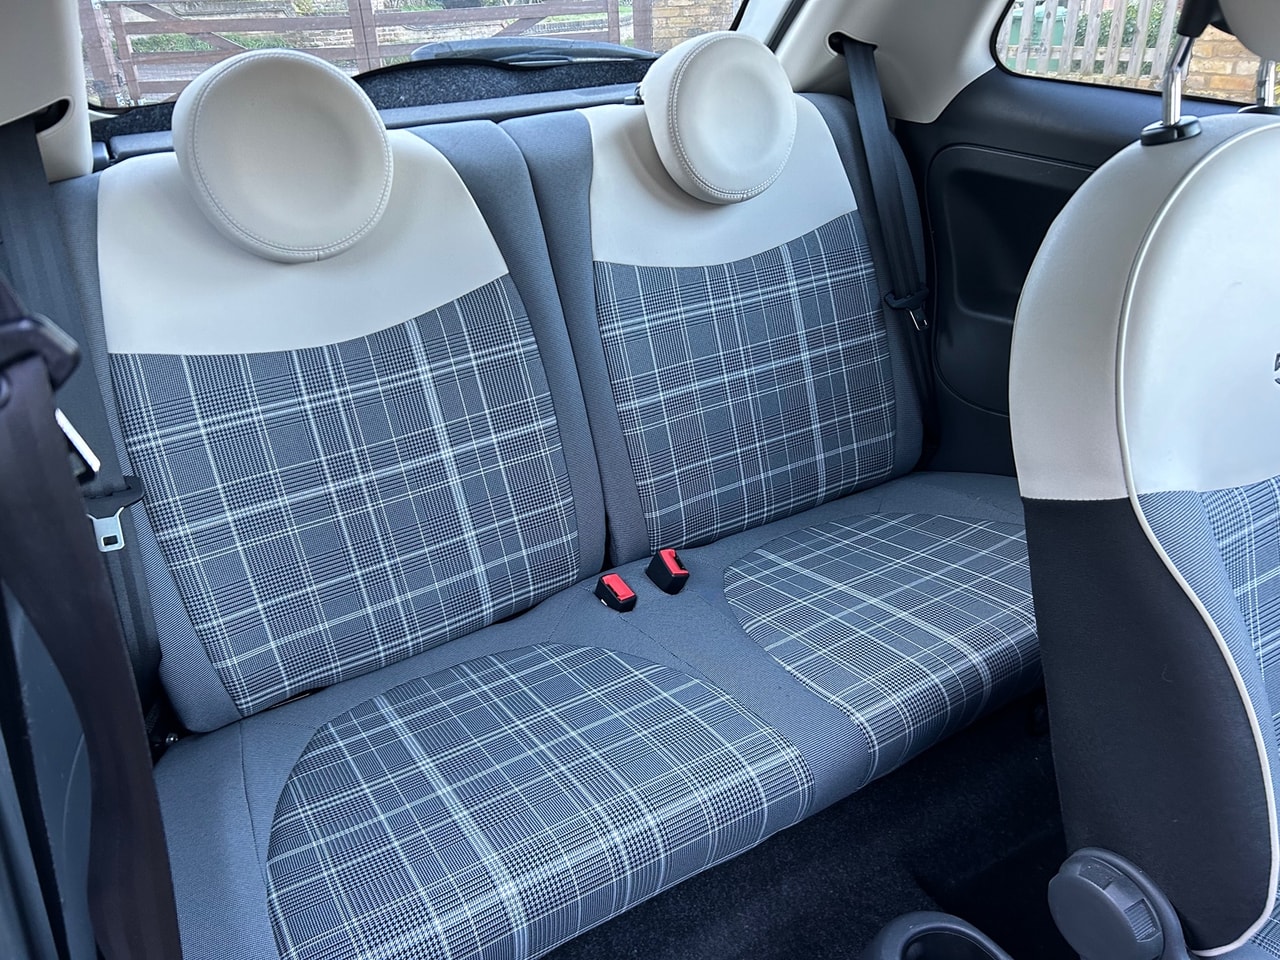 2015 FIAT 500 1.2i Lounge S/S - Picture 12 of 13